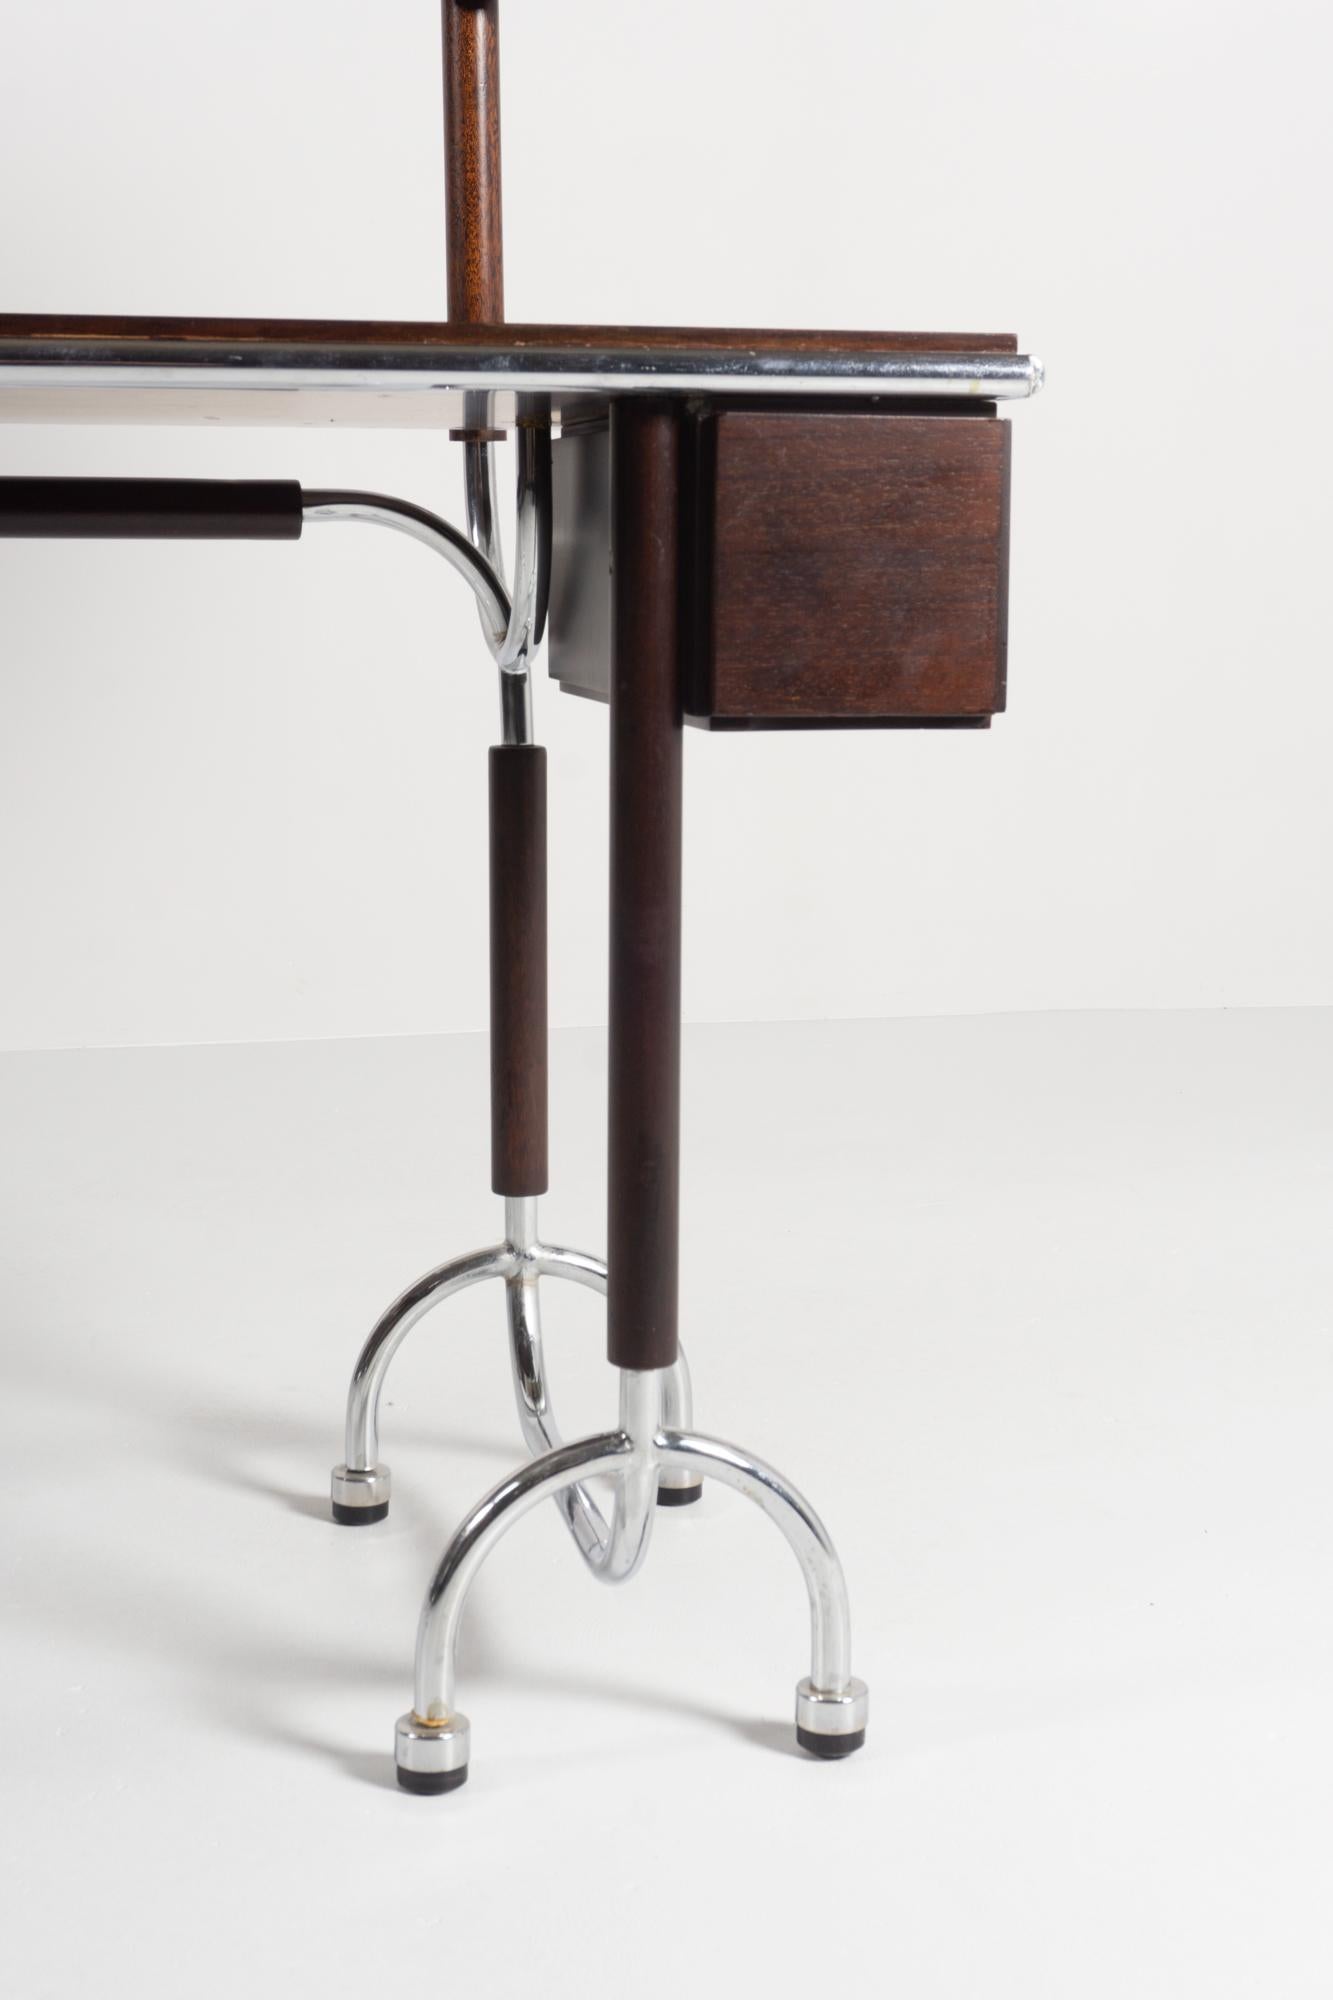 Dressing Table / Vanity Table by Roberto Gabetti and Aimaro Isola, produced by ARBO, Italy. Walnut, chrome-plated steel, mirror and lacquered wood.